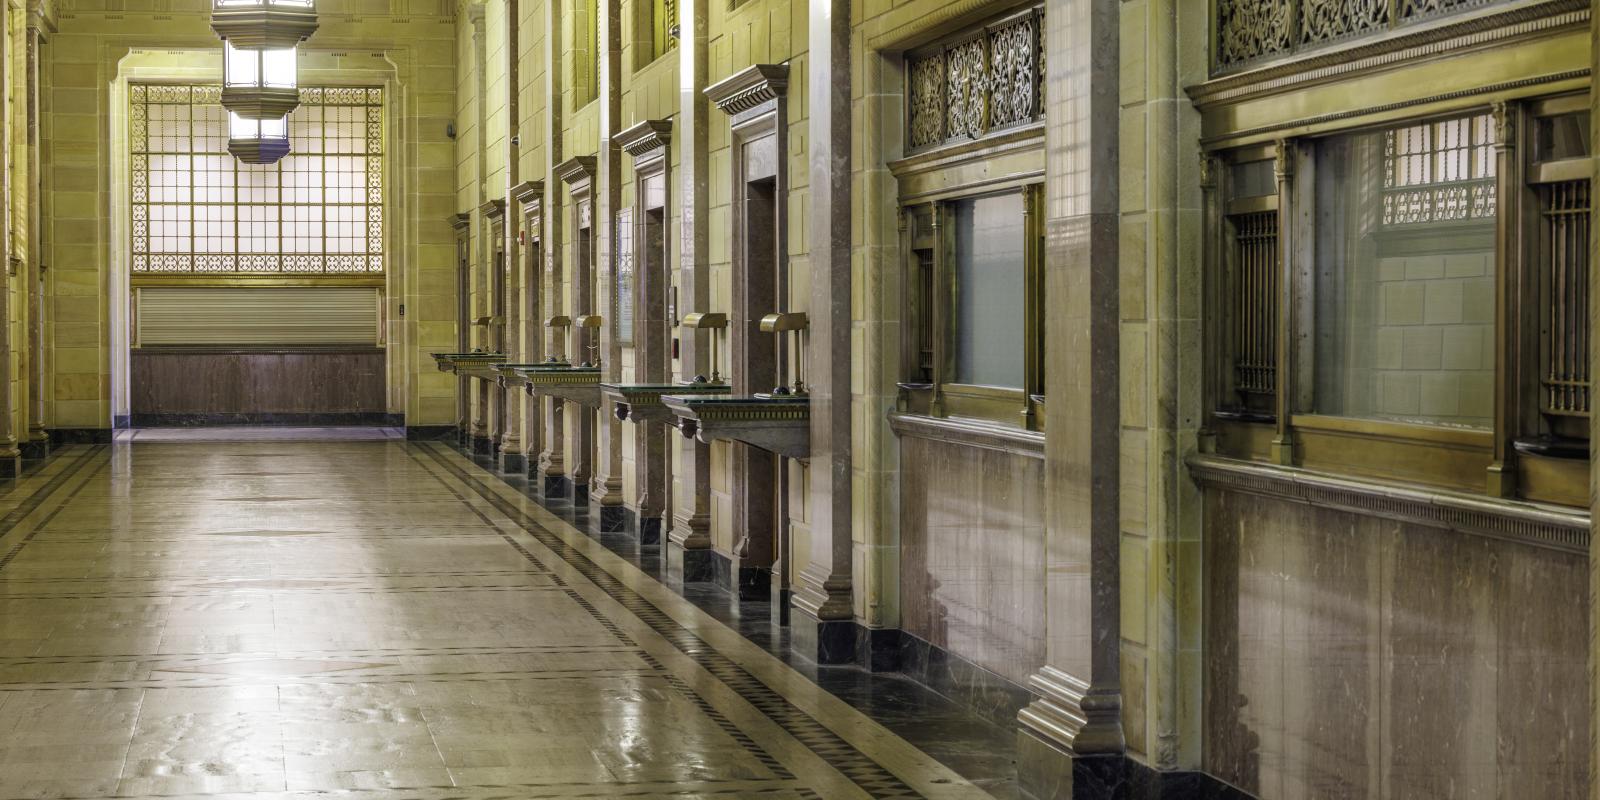 Photograph of former U.S. Post Office hallway in the Frank M Johnson Courthouse